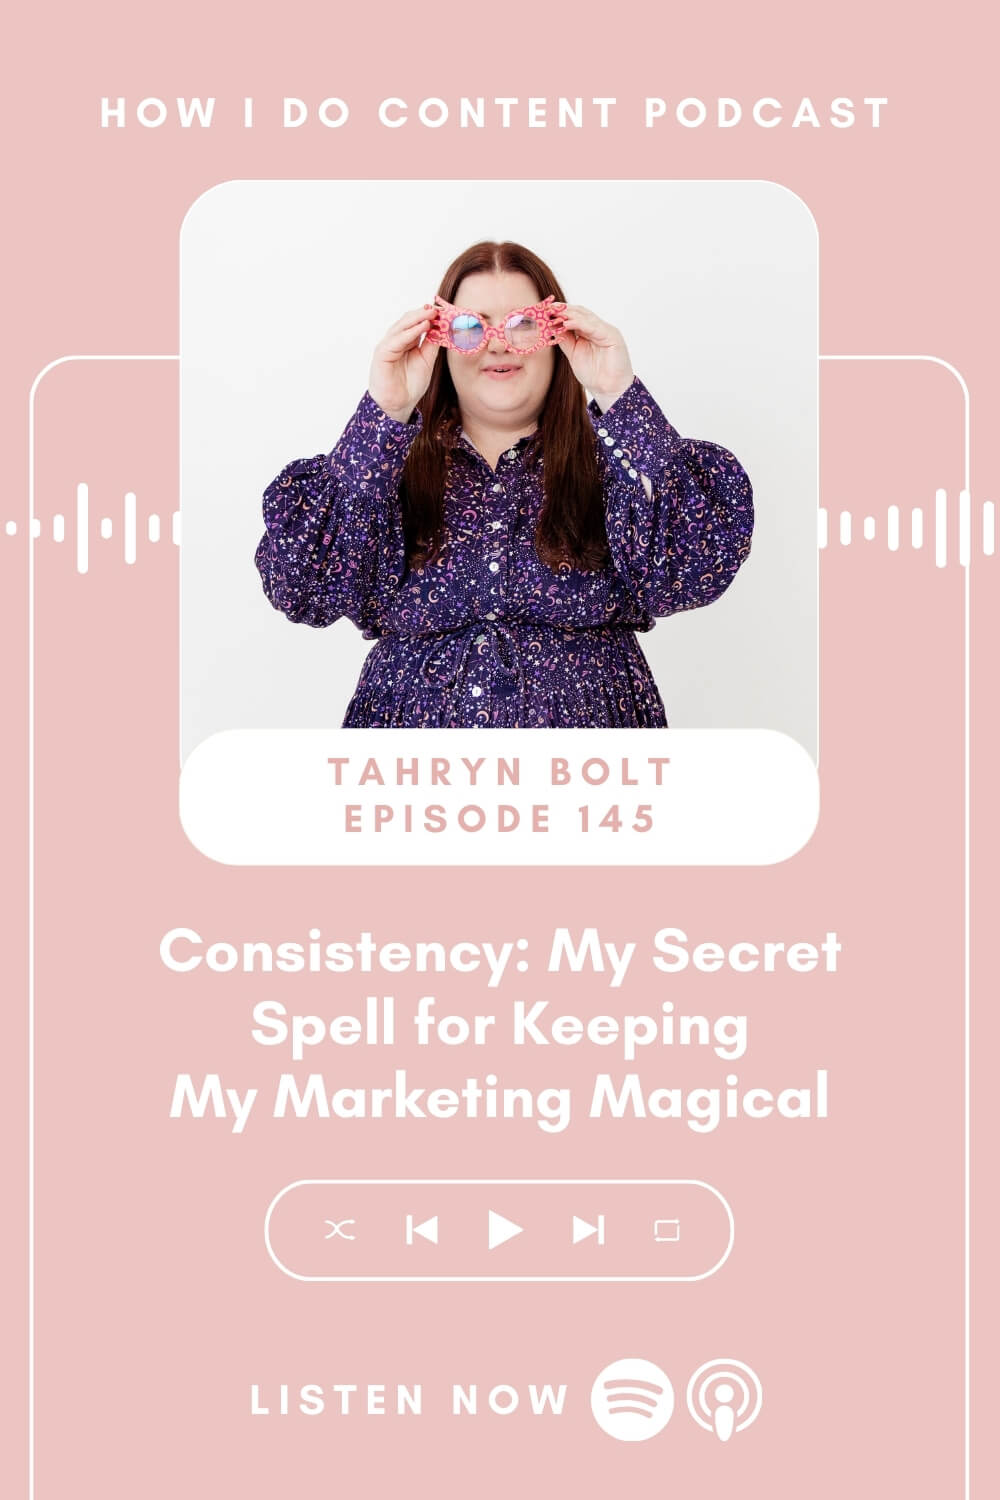 Consistency: My Secret Spell for Keeping My Marketing Magical